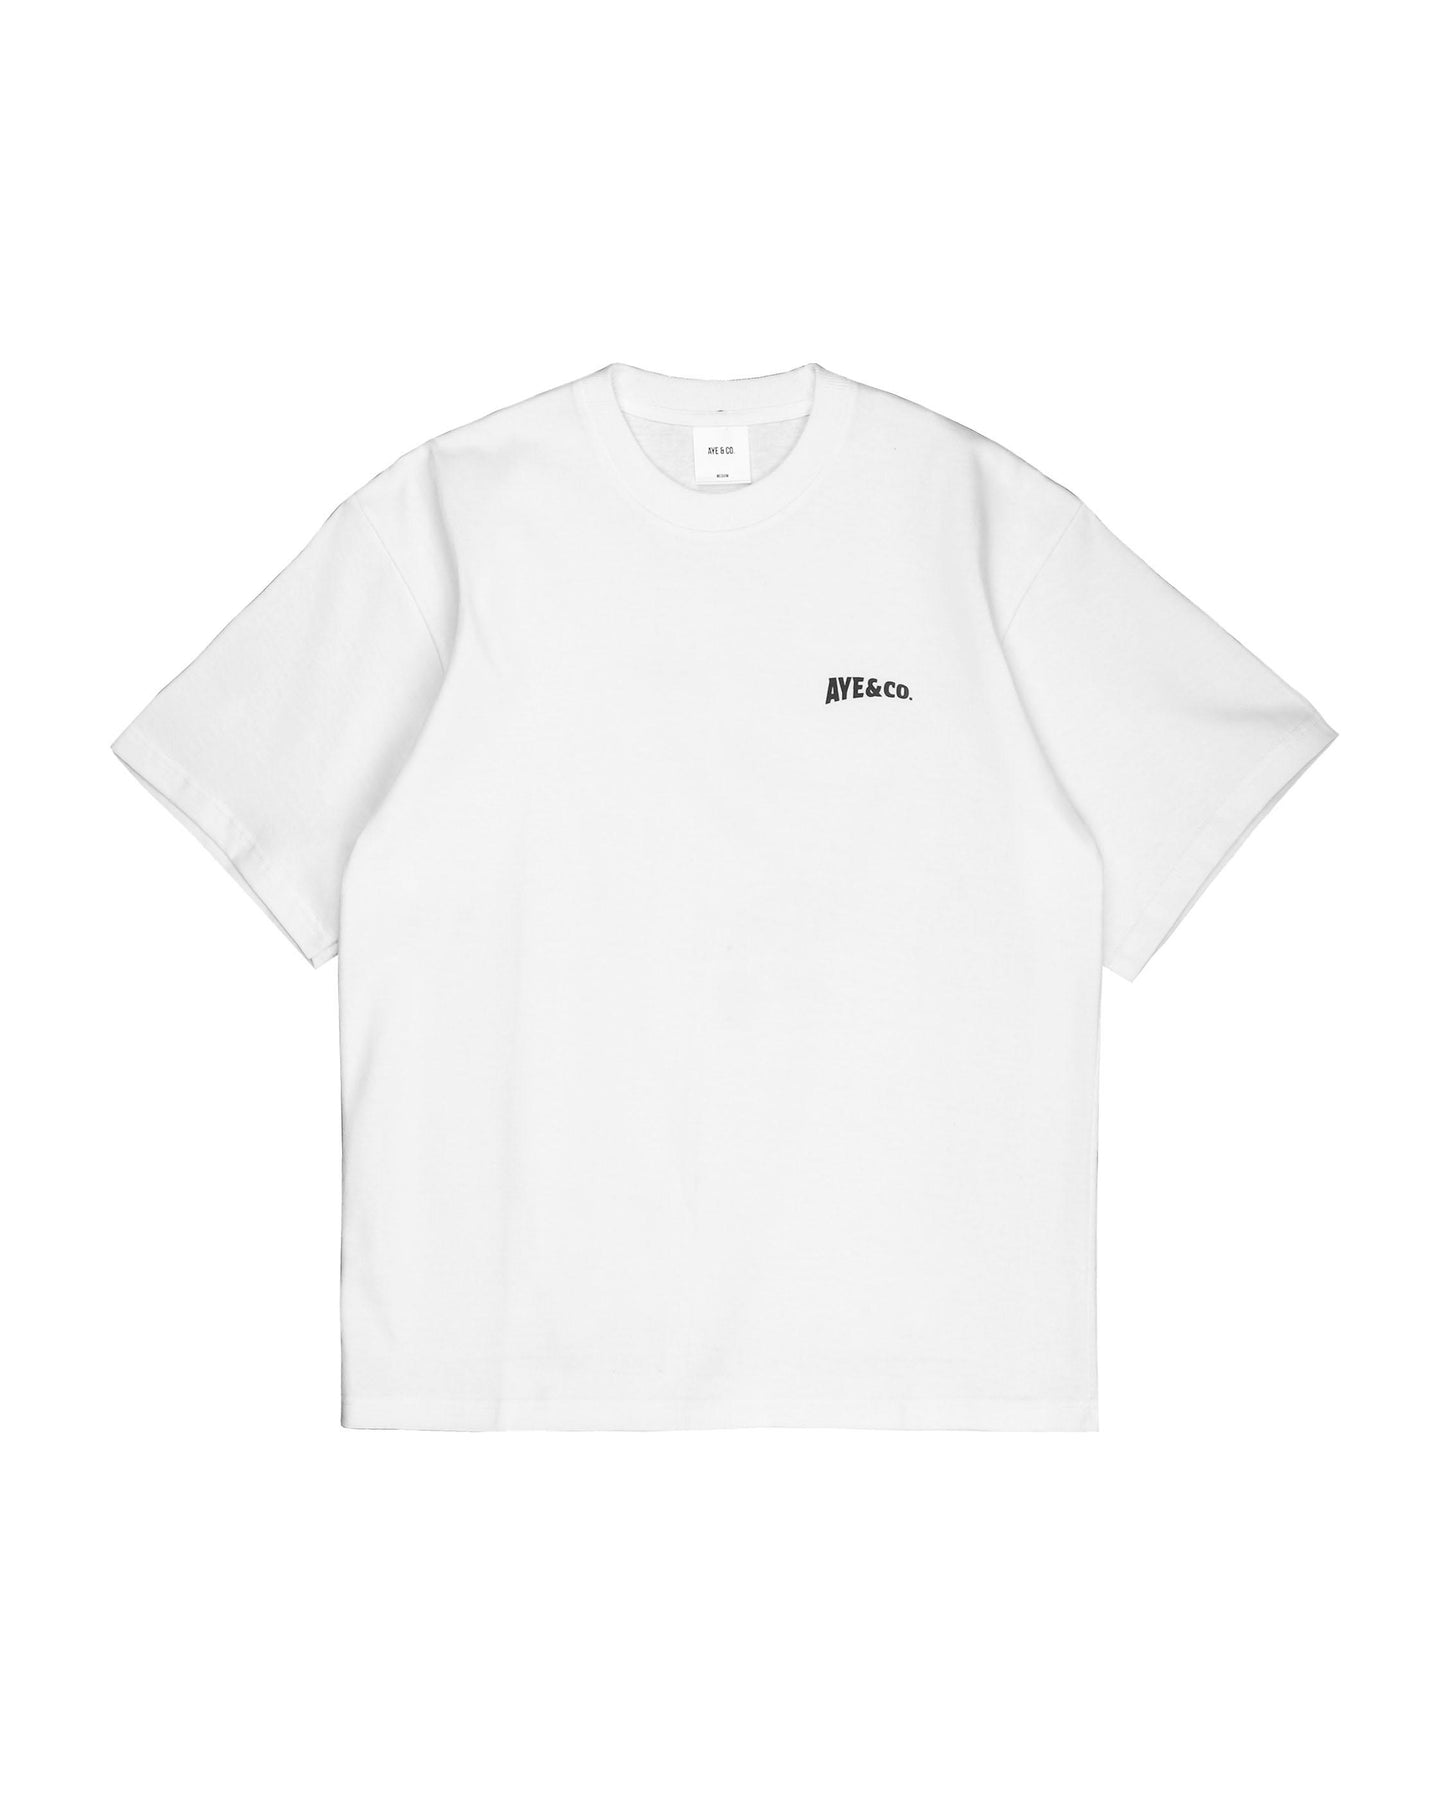 Palma White Relaxed Fit Tees